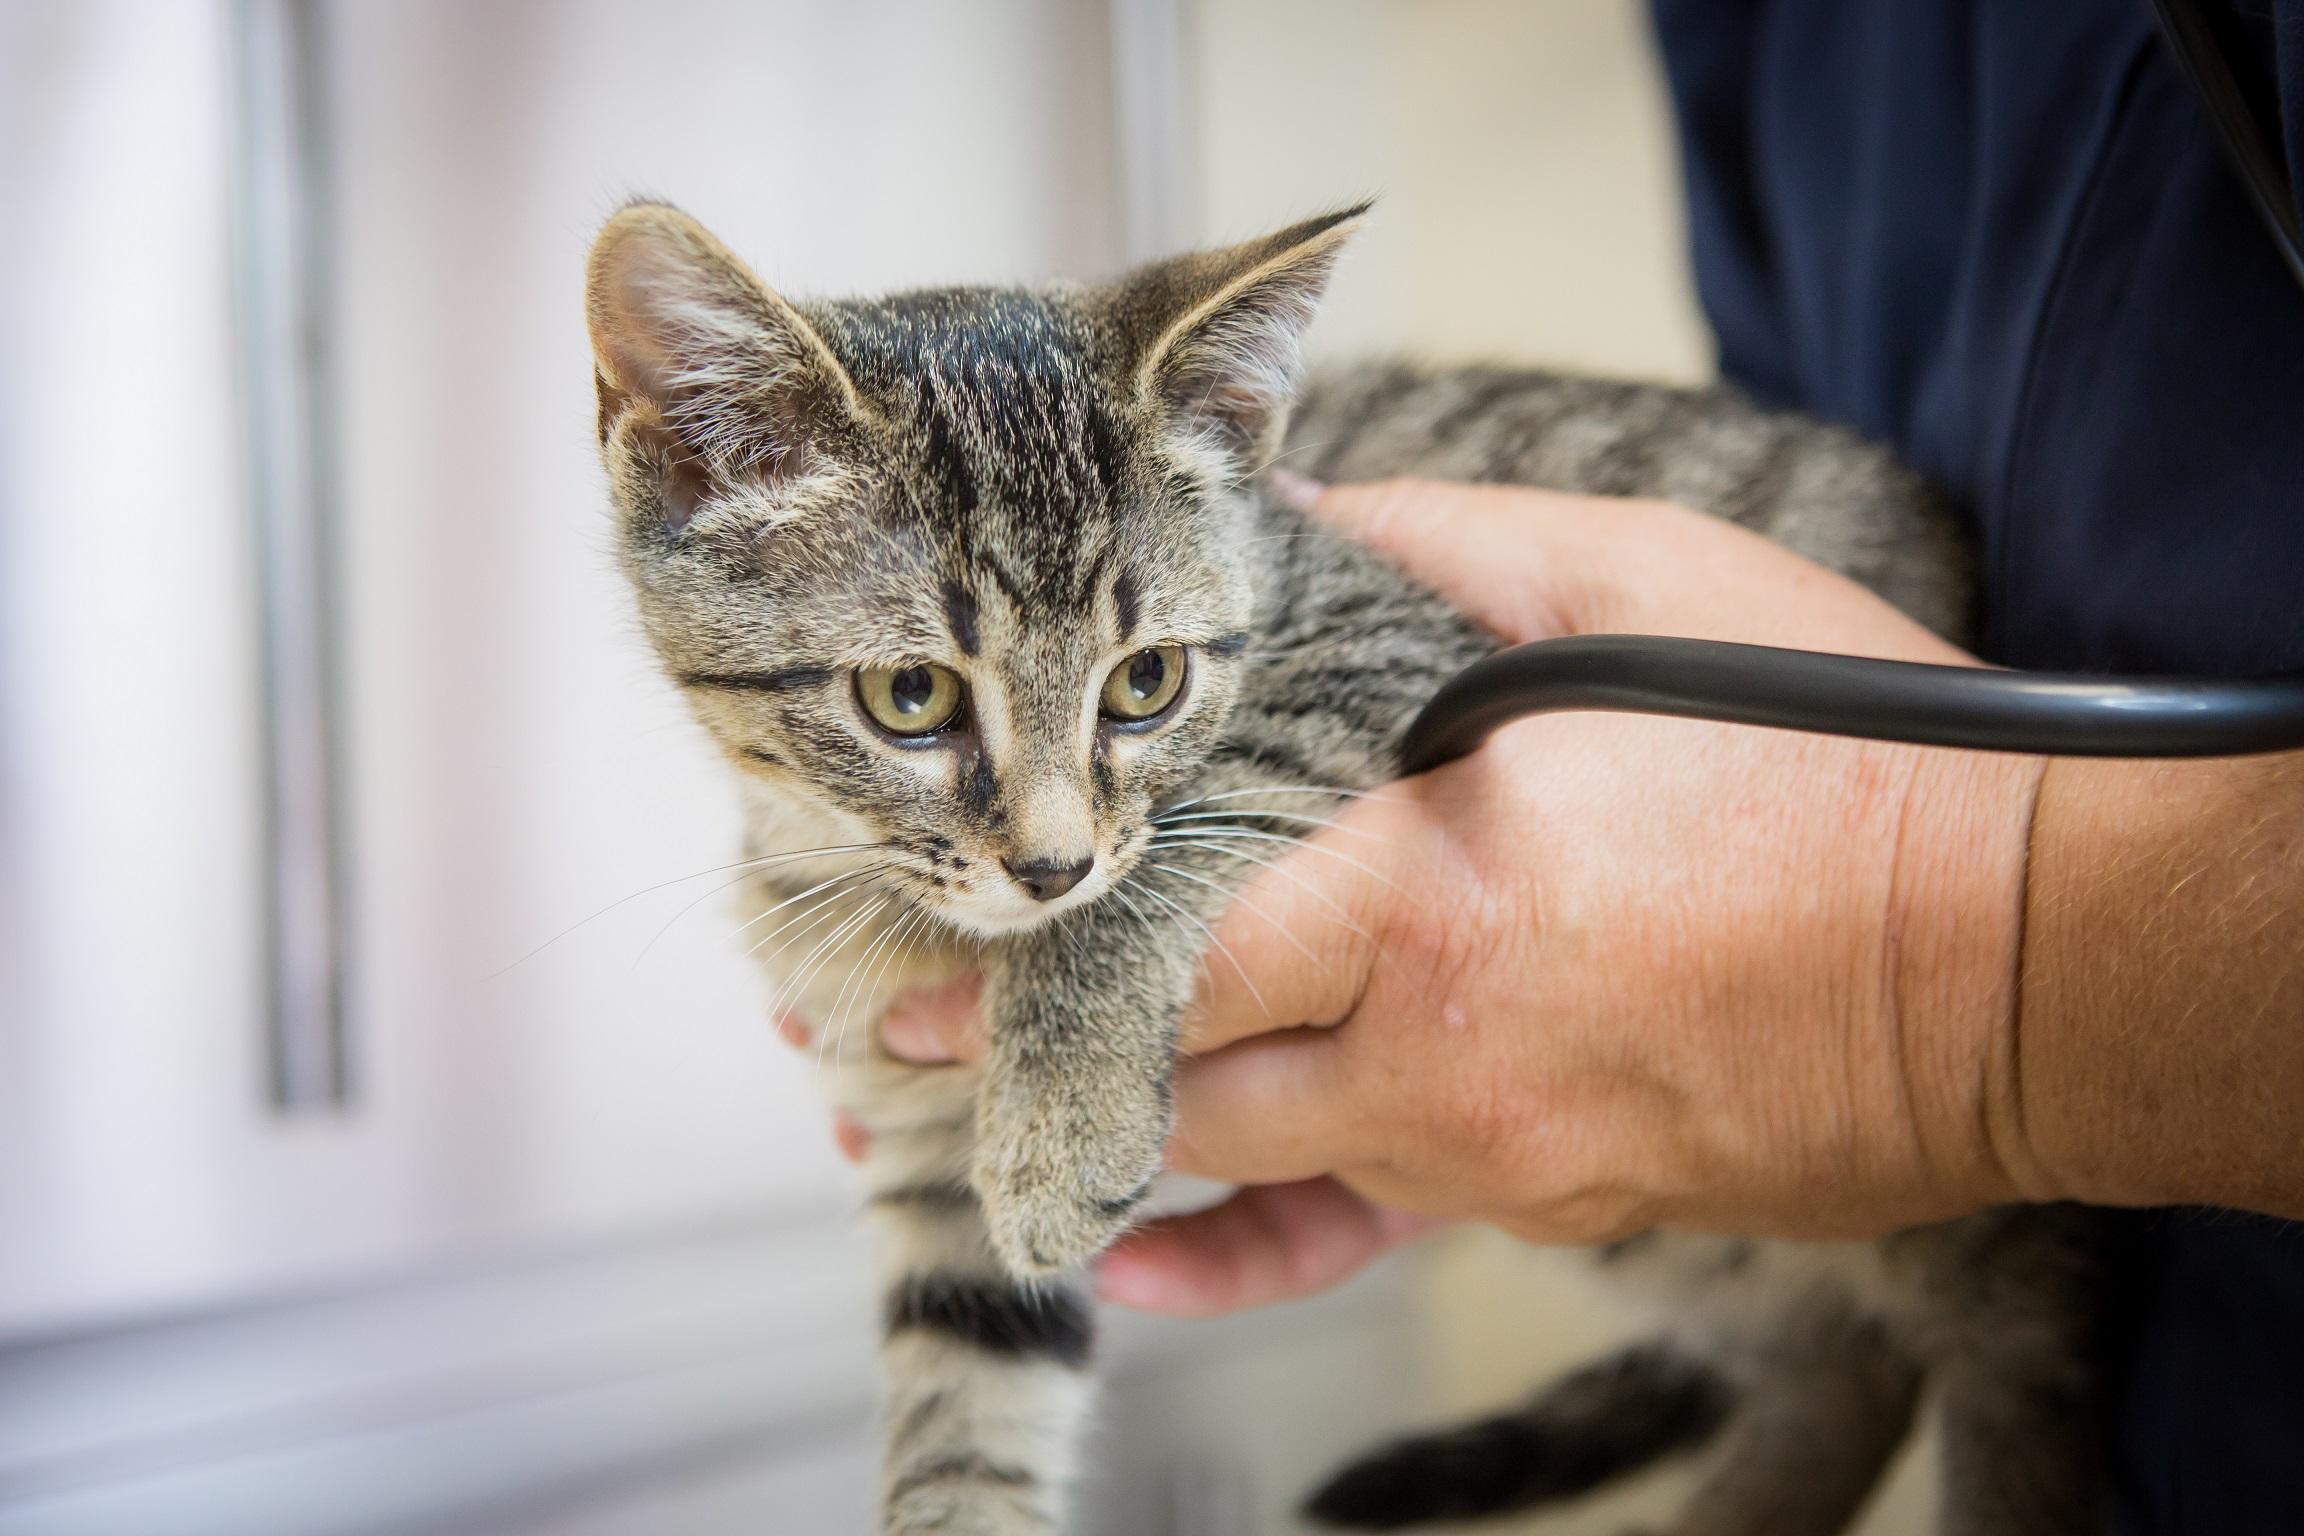 You can trust that your pet is in good hands at Skinner Animal Clinic! Our doctors have years of experiencing caring for Wilmington's cats and dogs.